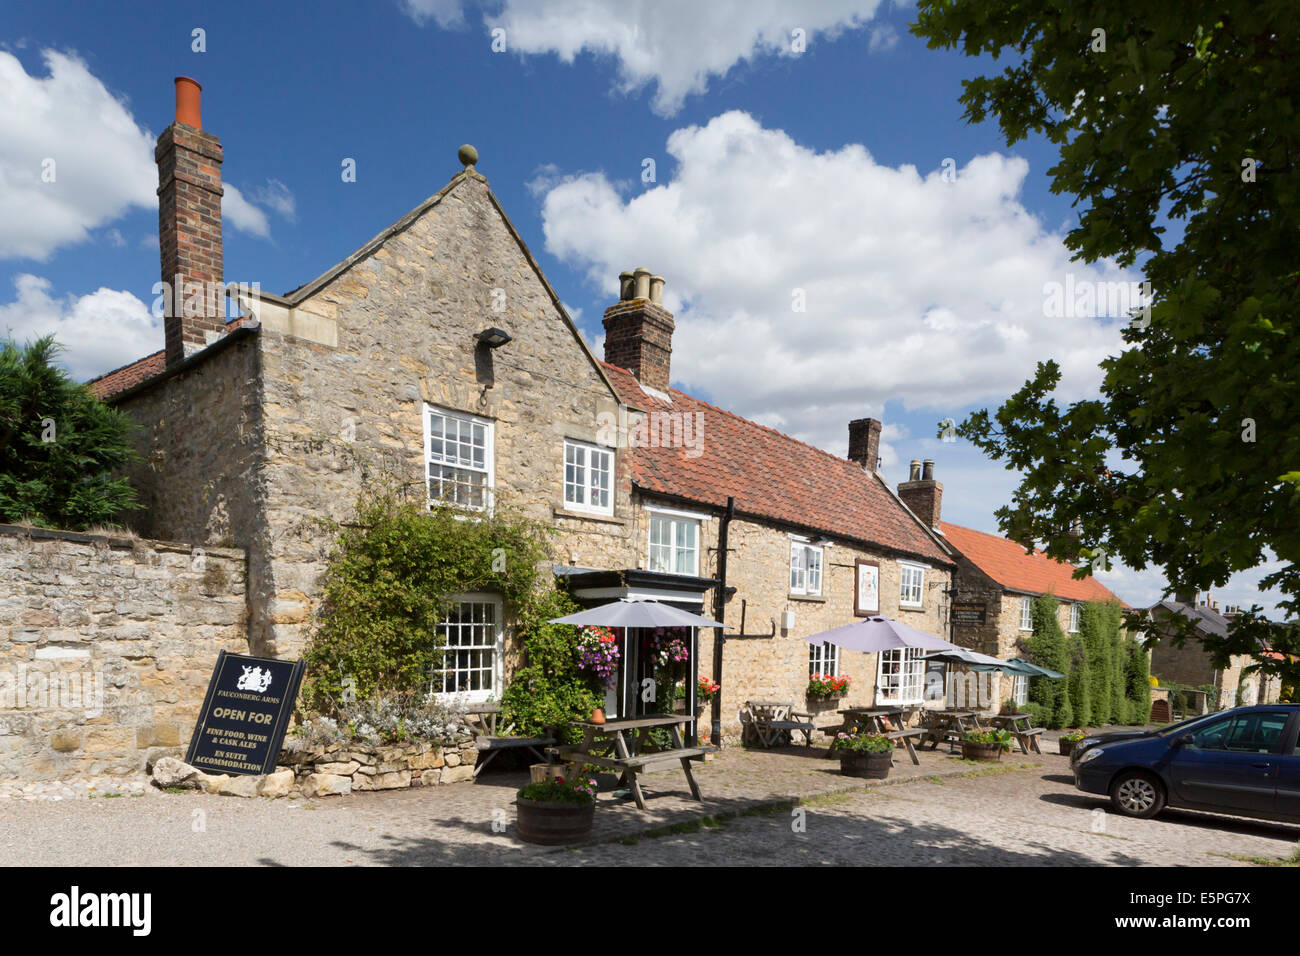 Fauconberb Arms Inn in Coxwold Dorf in North Yorkshire Stockfoto